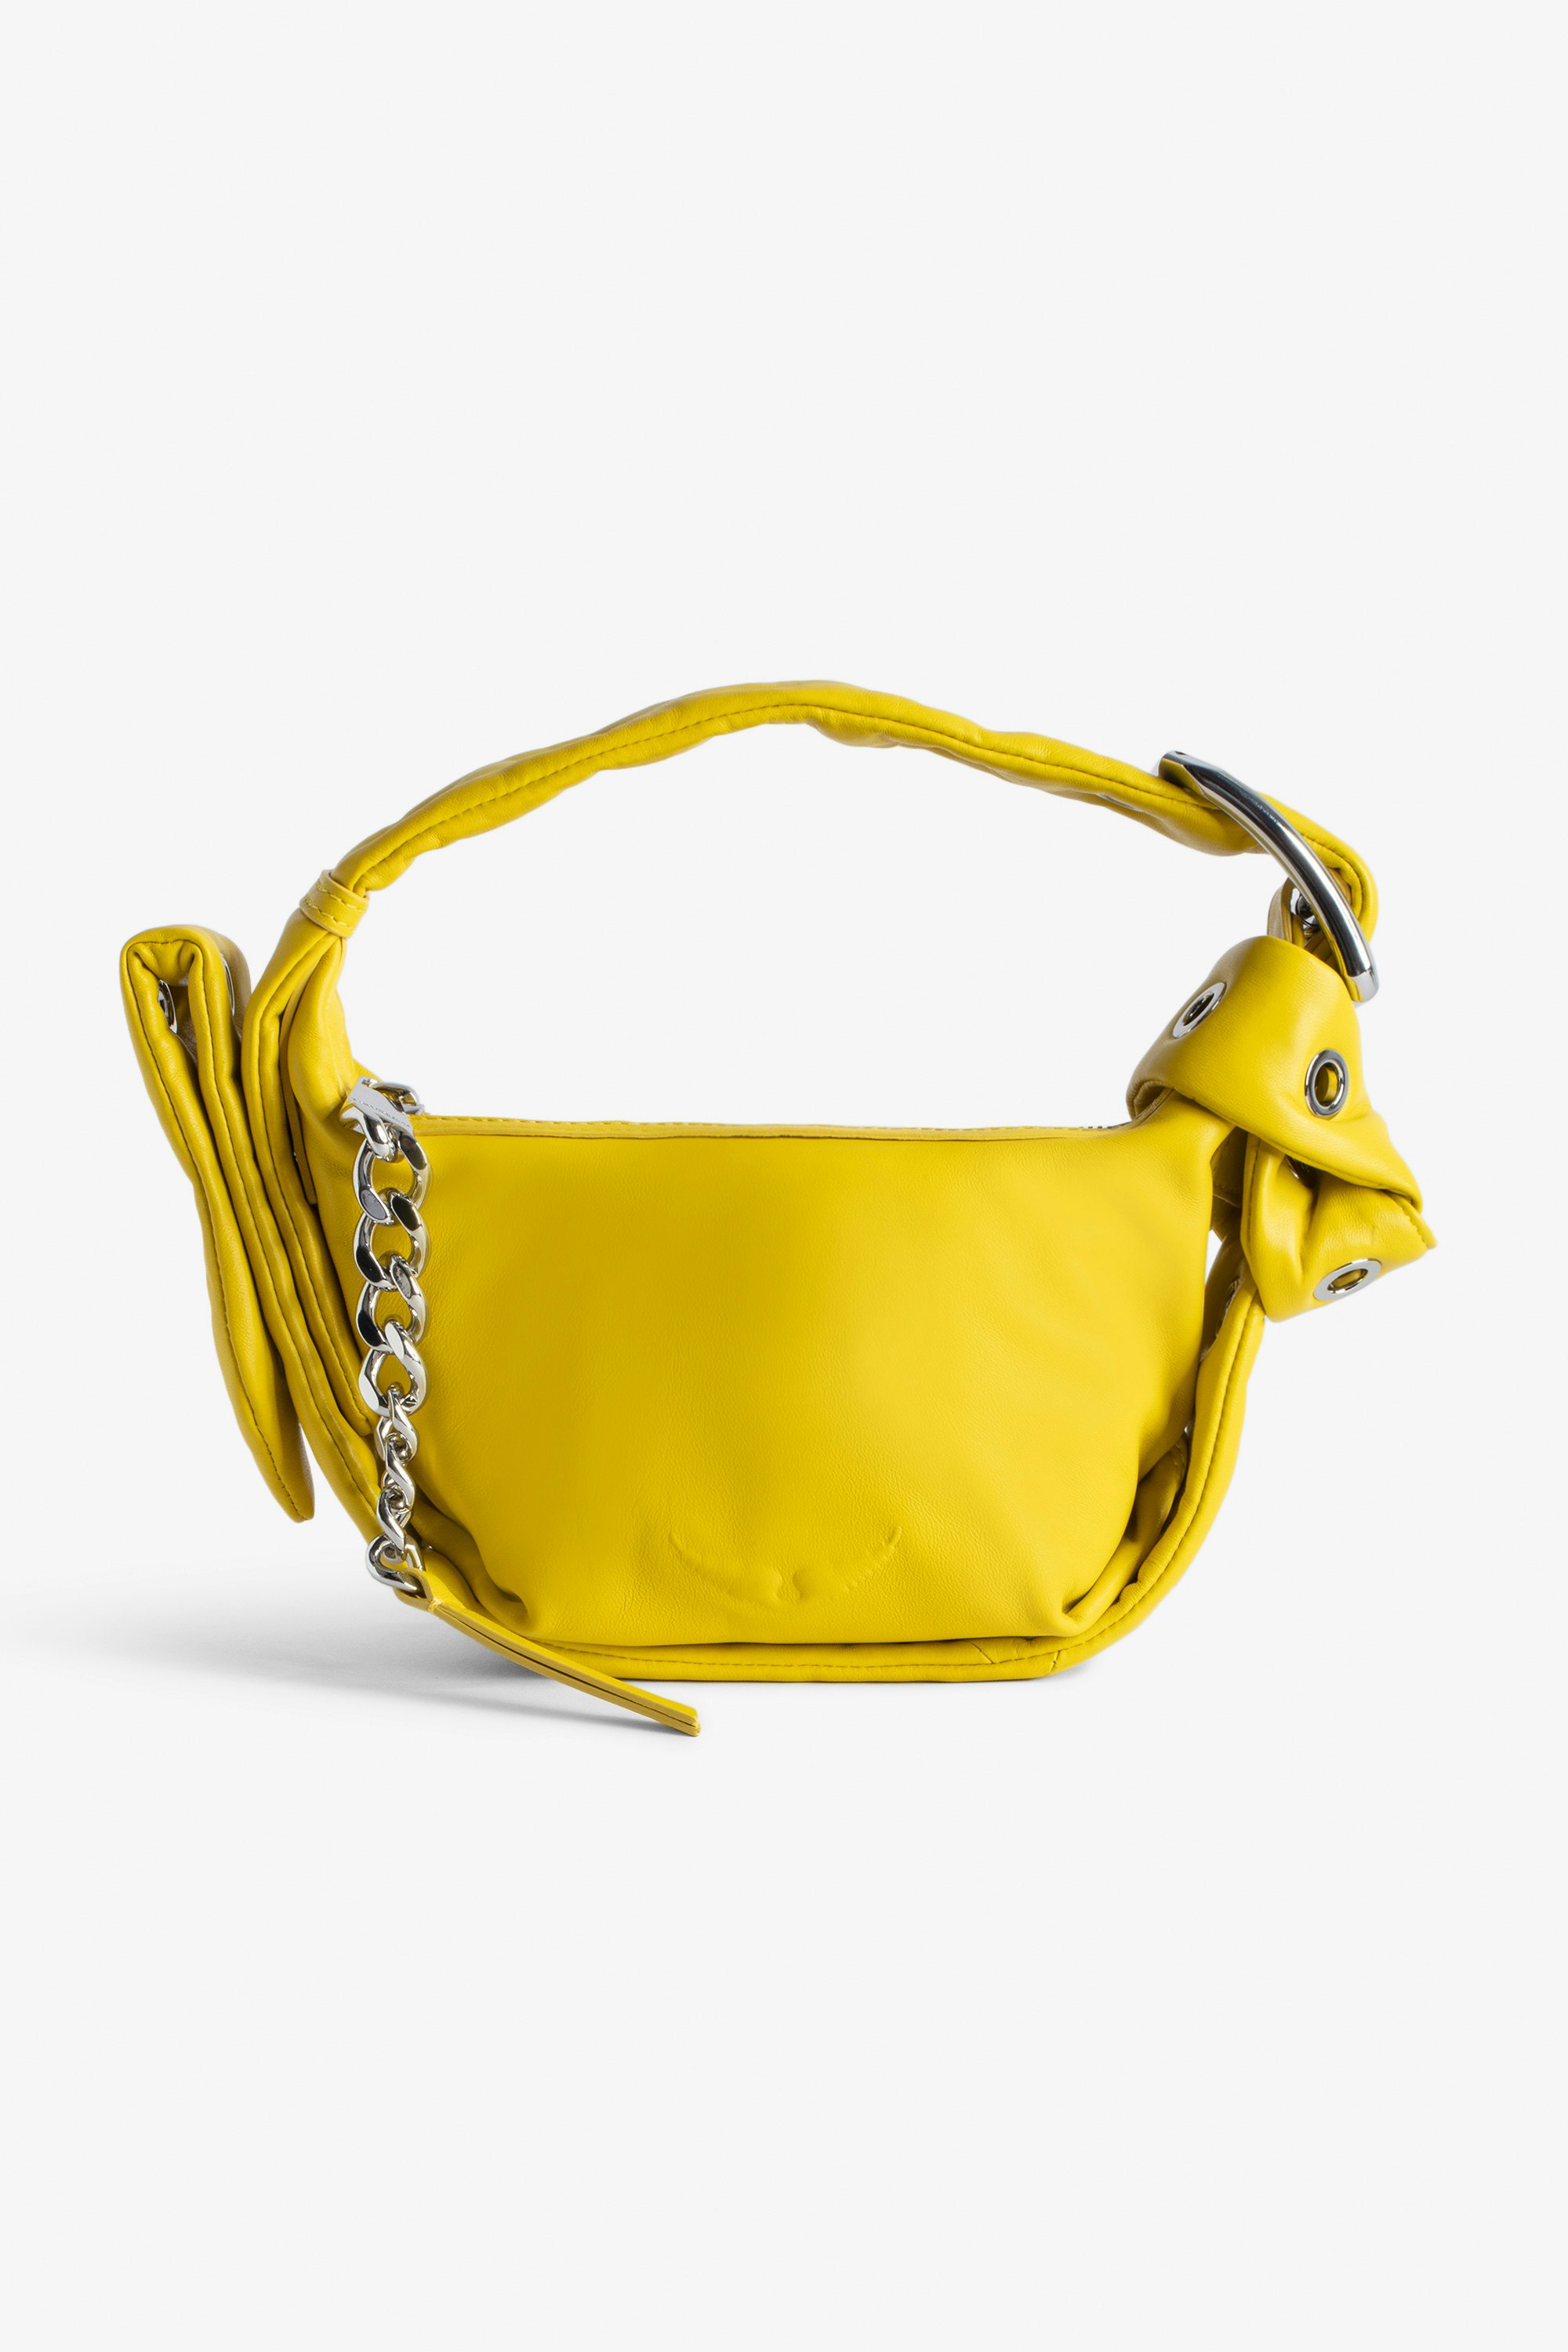 Le Cecilia XS Obsession Bag - Women’s small yellow smooth leather bag with shoulder strap and metal C buckle.